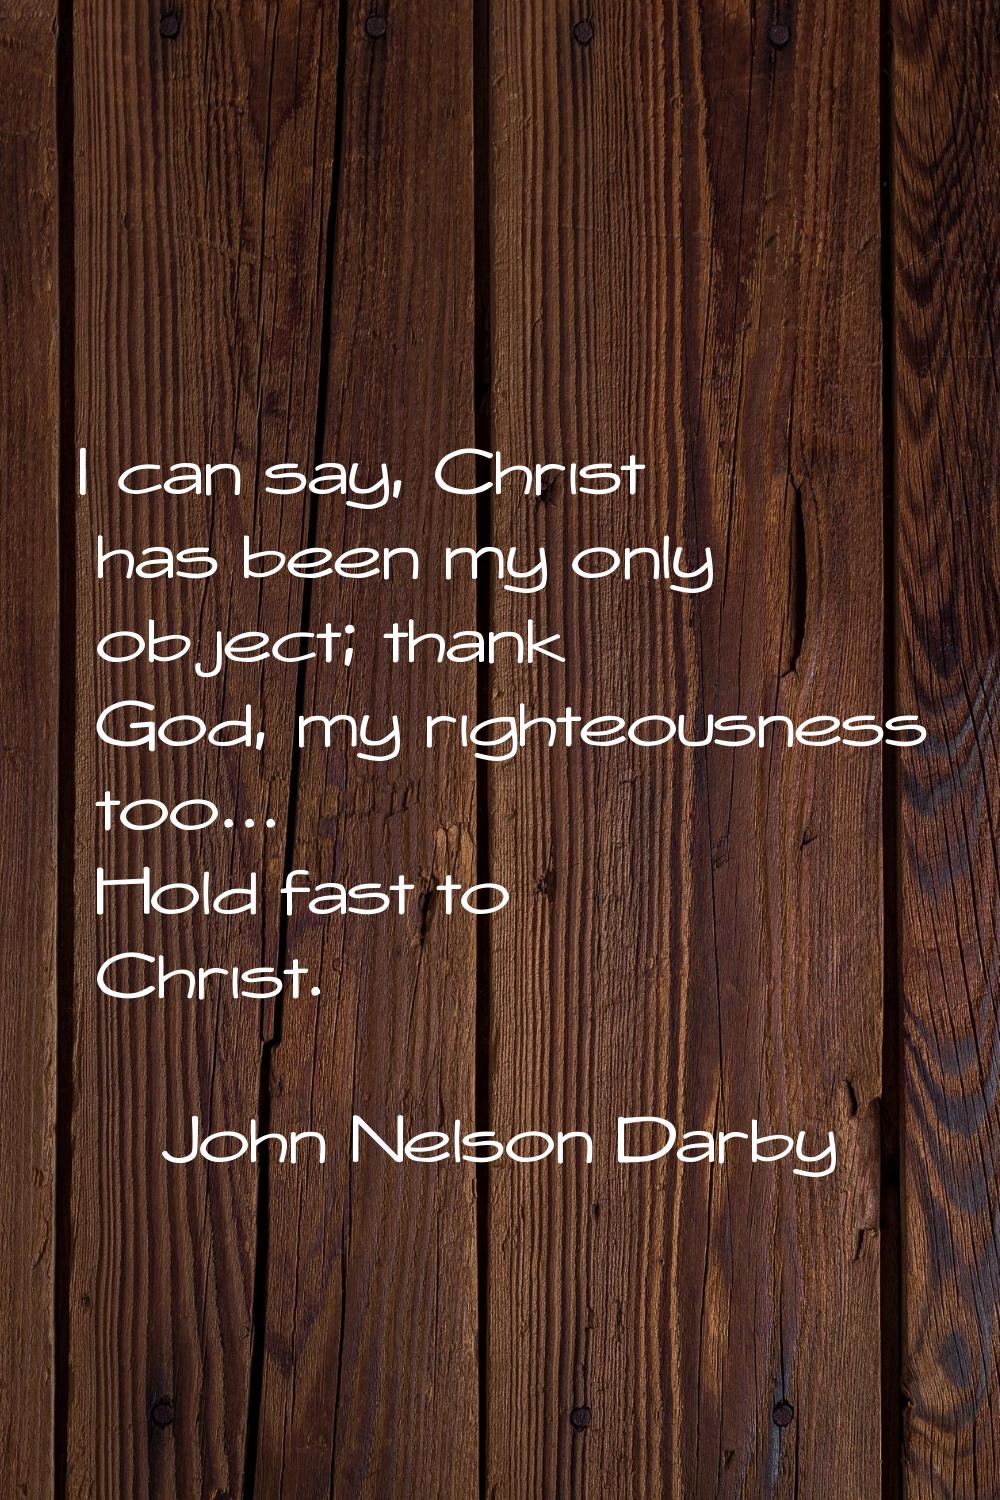 I can say, Christ has been my only object; thank God, my righteousness too... Hold fast to Christ.